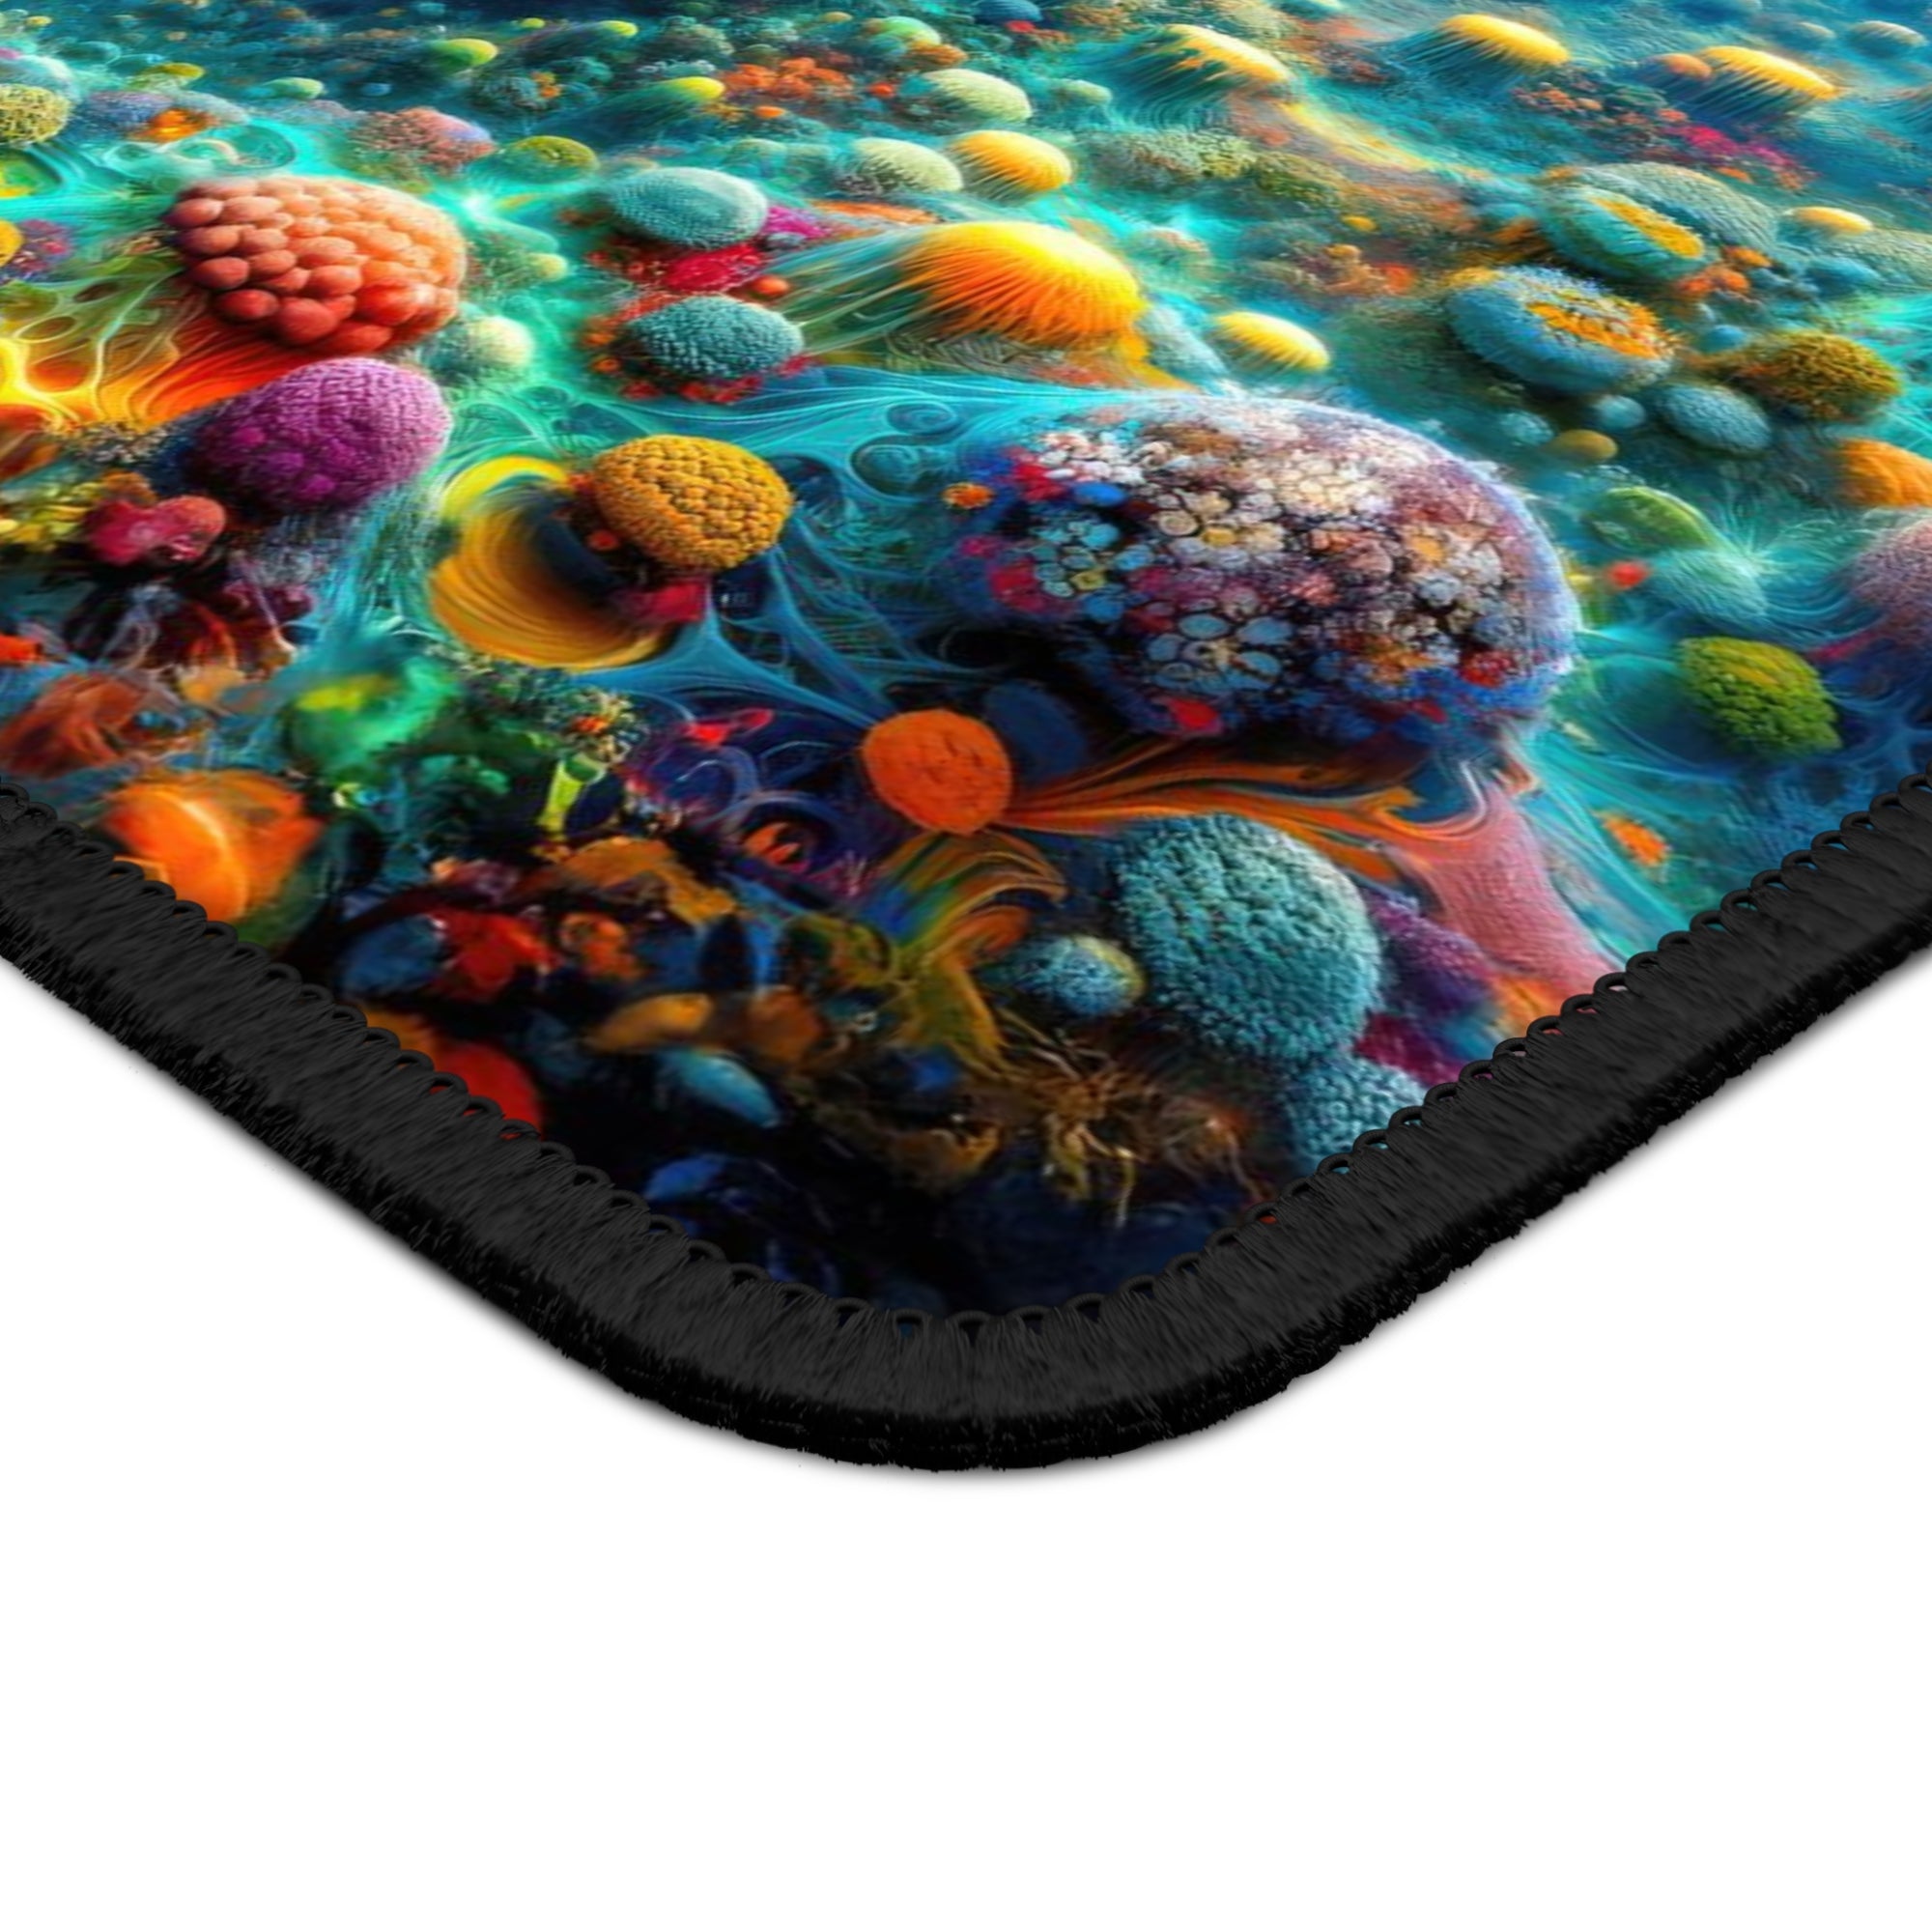 The Sovereign of Spiral Reefs Gaming Mouse Pad